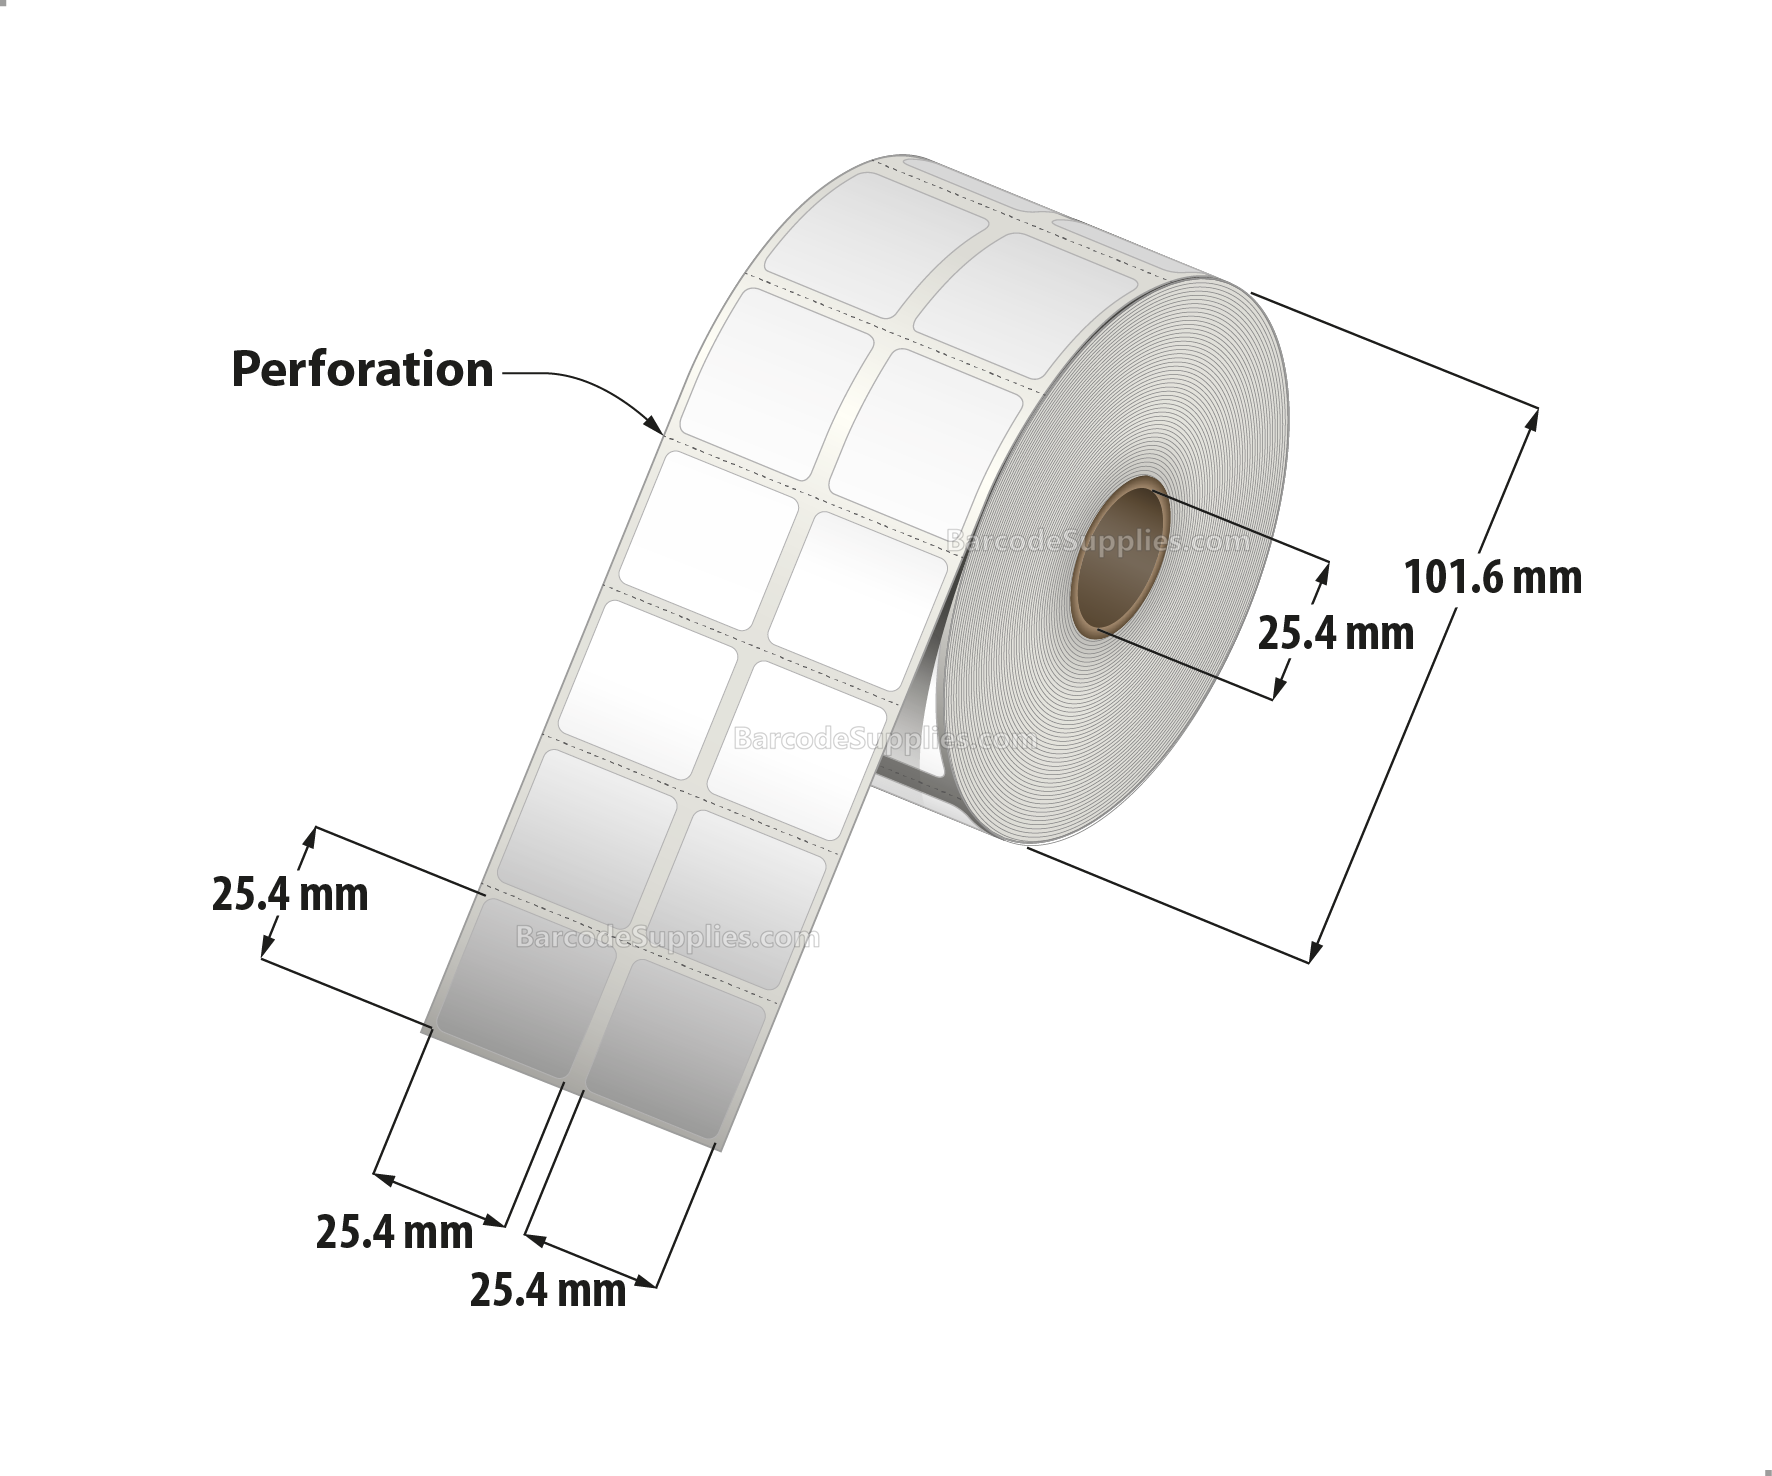 1 x 1 Direct Thermal White Labels With Acrylic Adhesive - Perforated - 2750 Labels Per Roll - Carton Of 12 Rolls - 33000 Labels Total - MPN: RD-1-1-2750-1